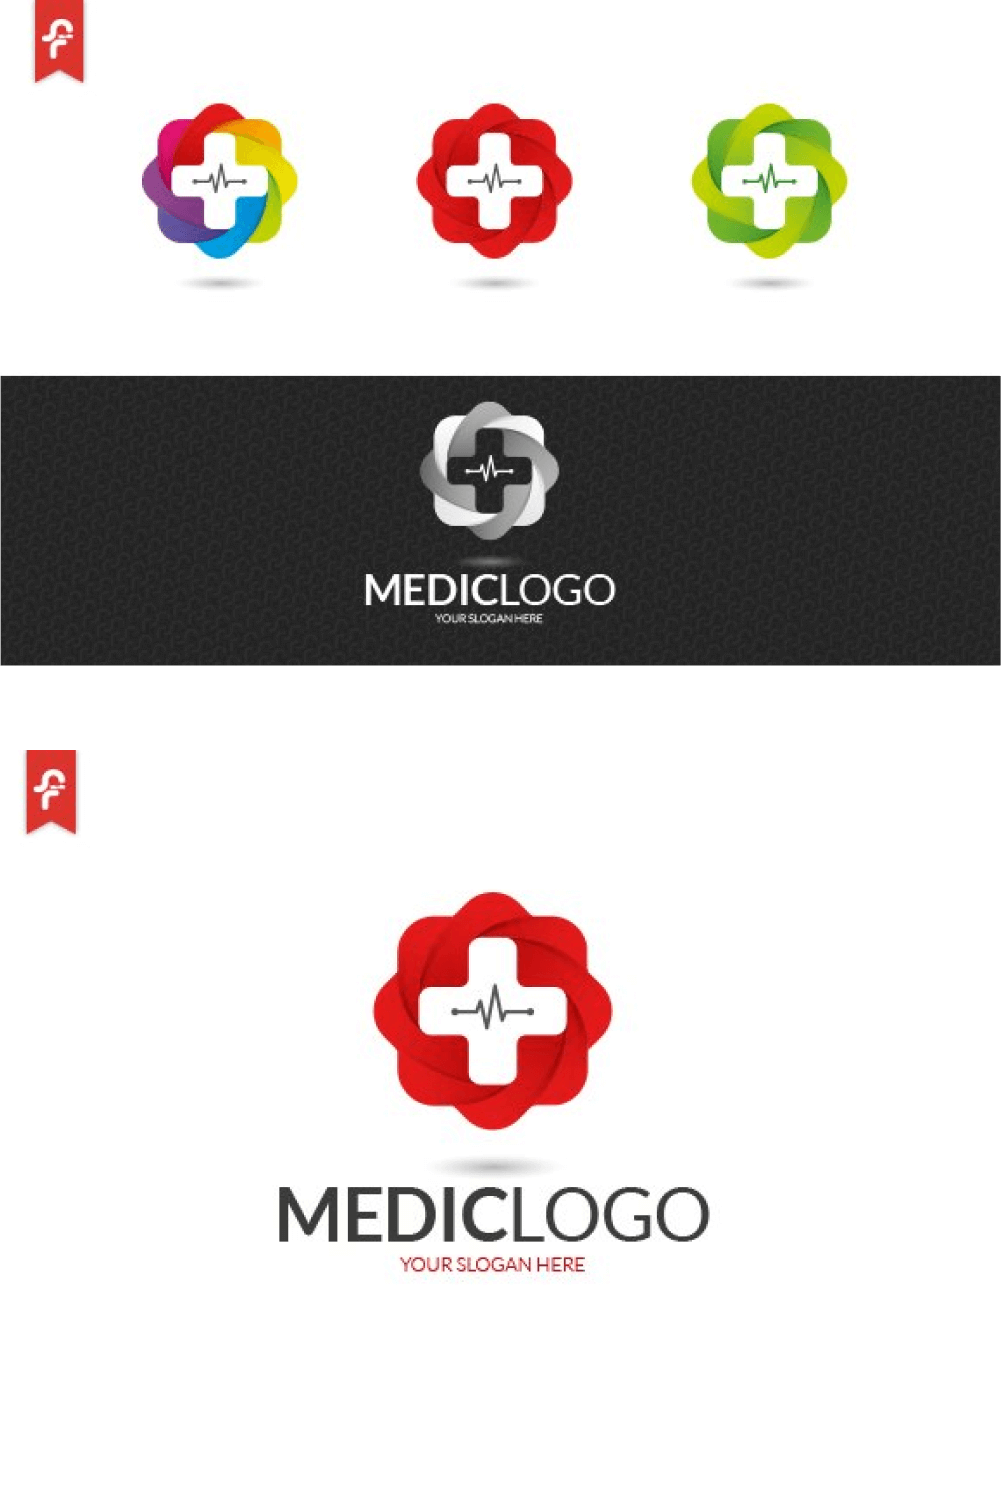 Various Types of Mediclogo Icons.